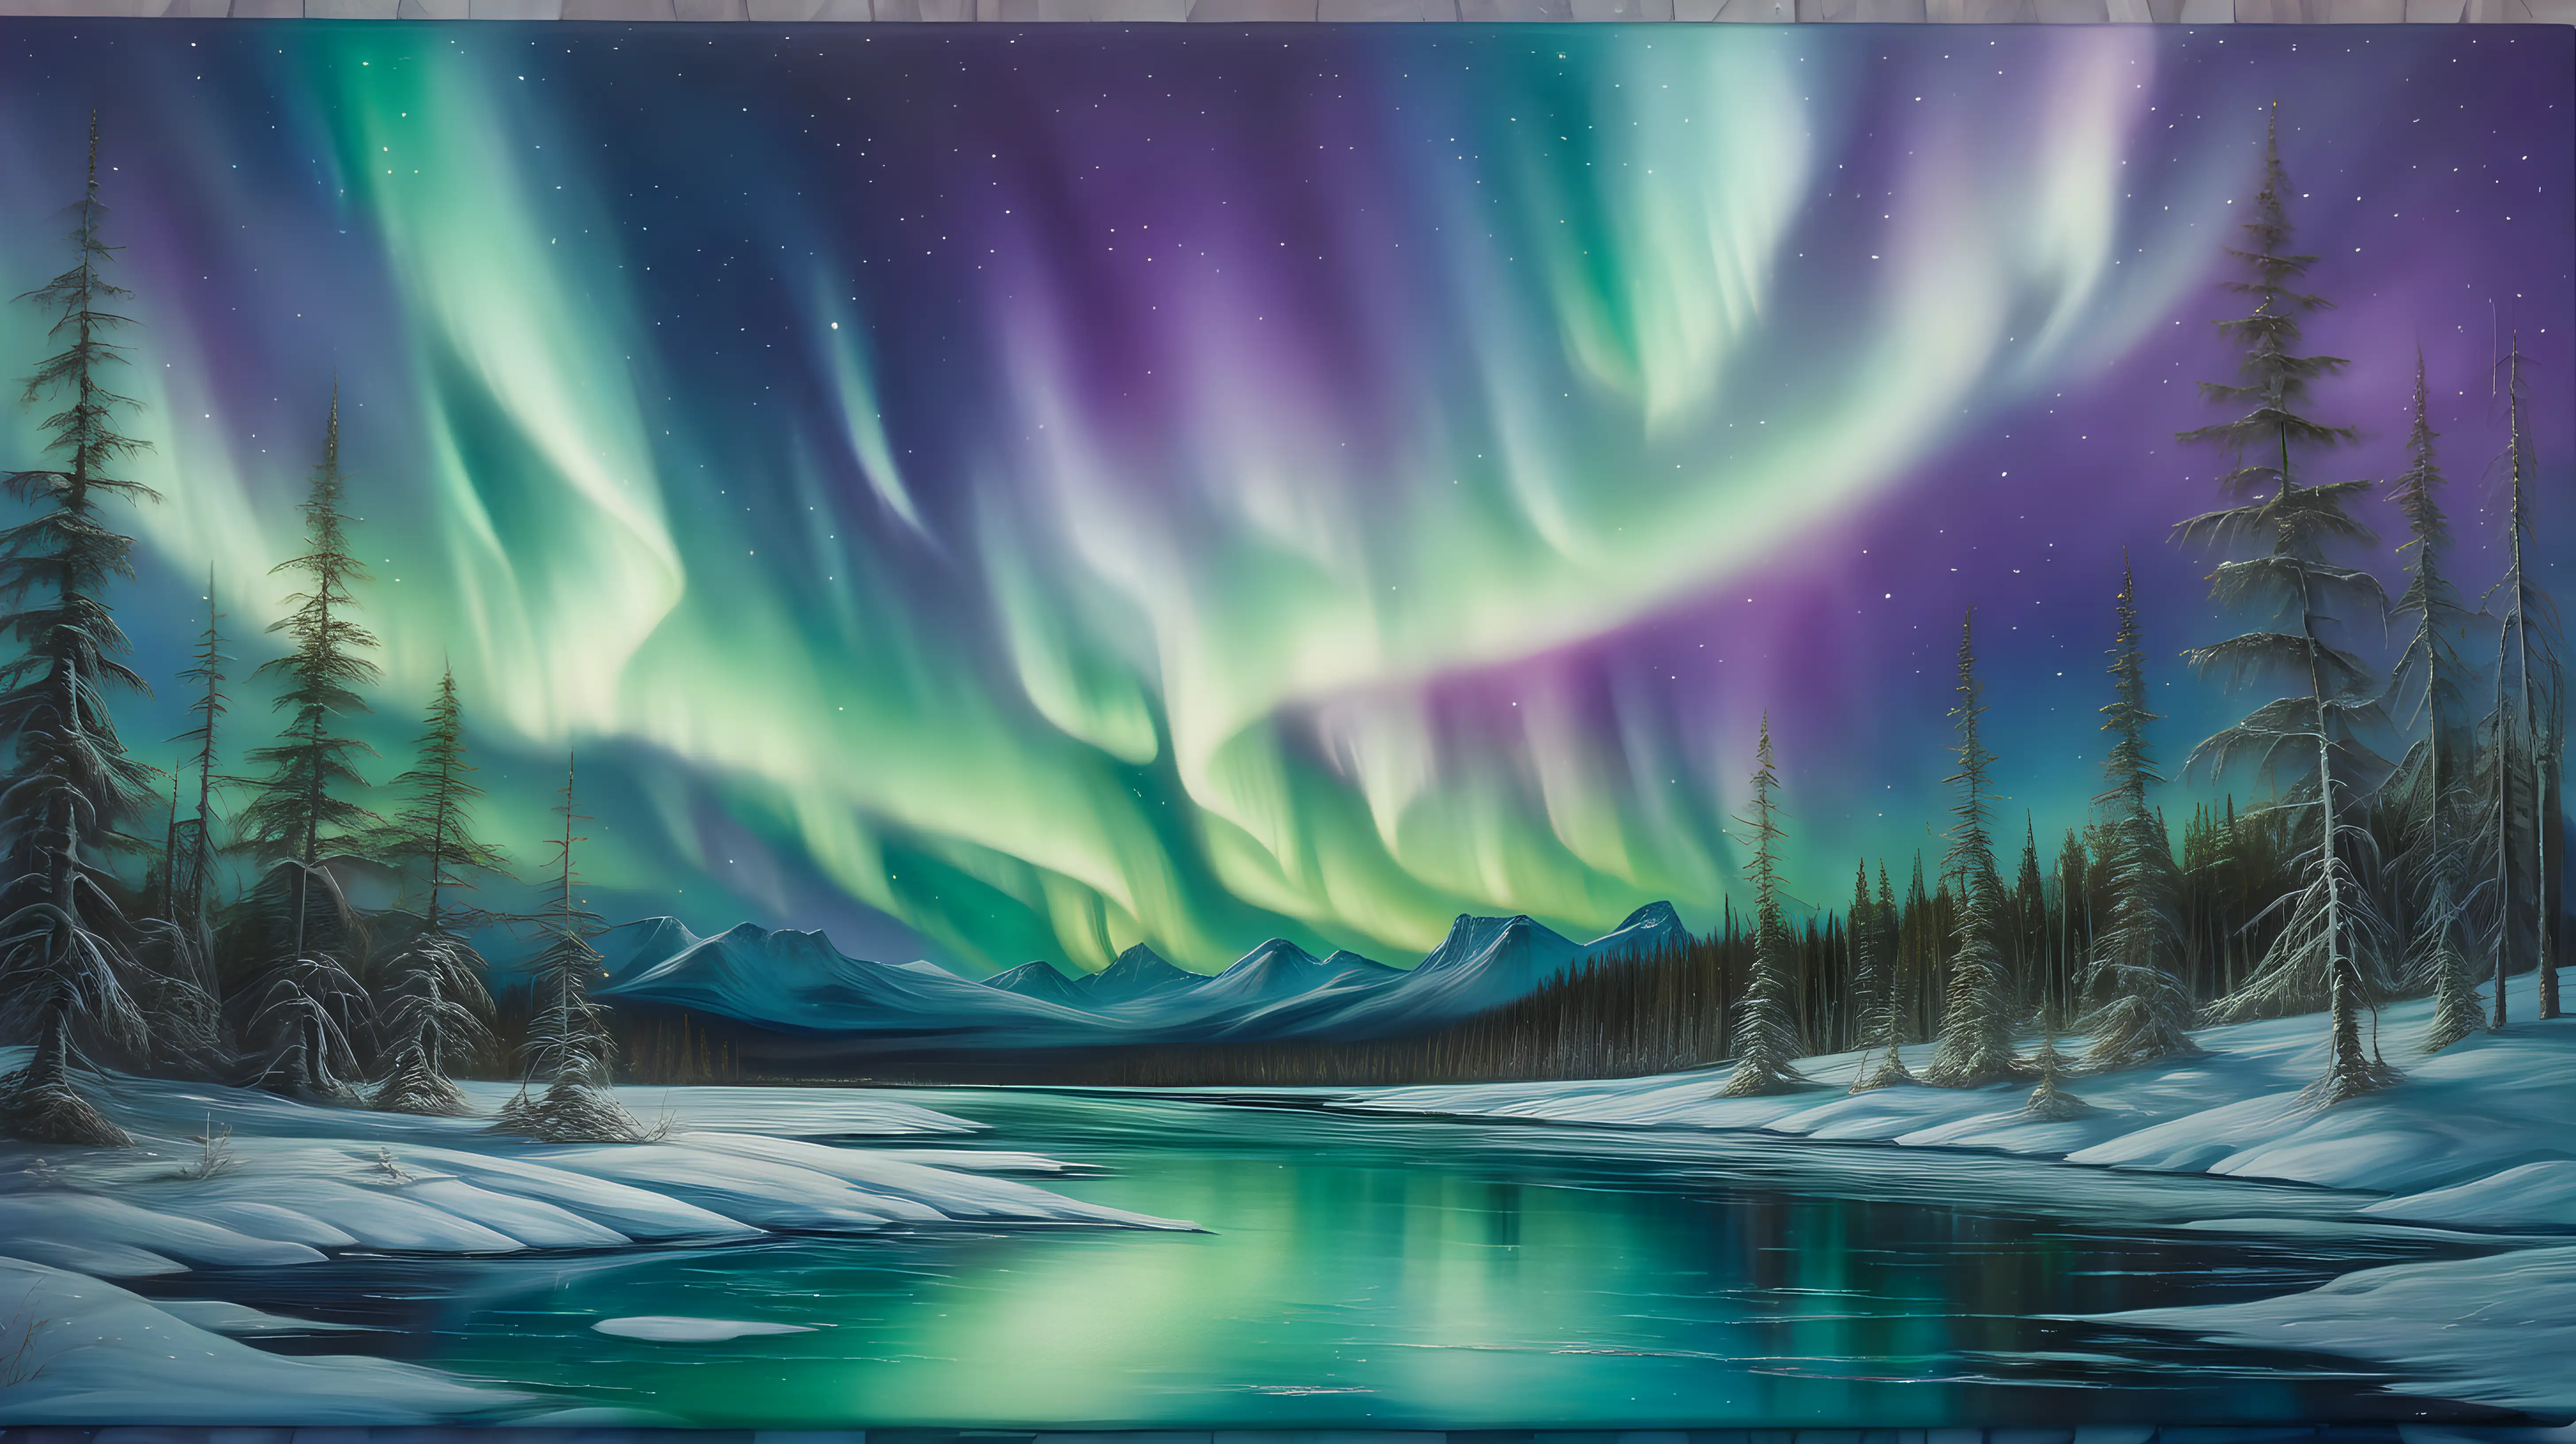 Iridescent greens and purples dance across the canvas, mimicking the beauty of the Northern Lights. The background exudes a magical and otherworldly feel.